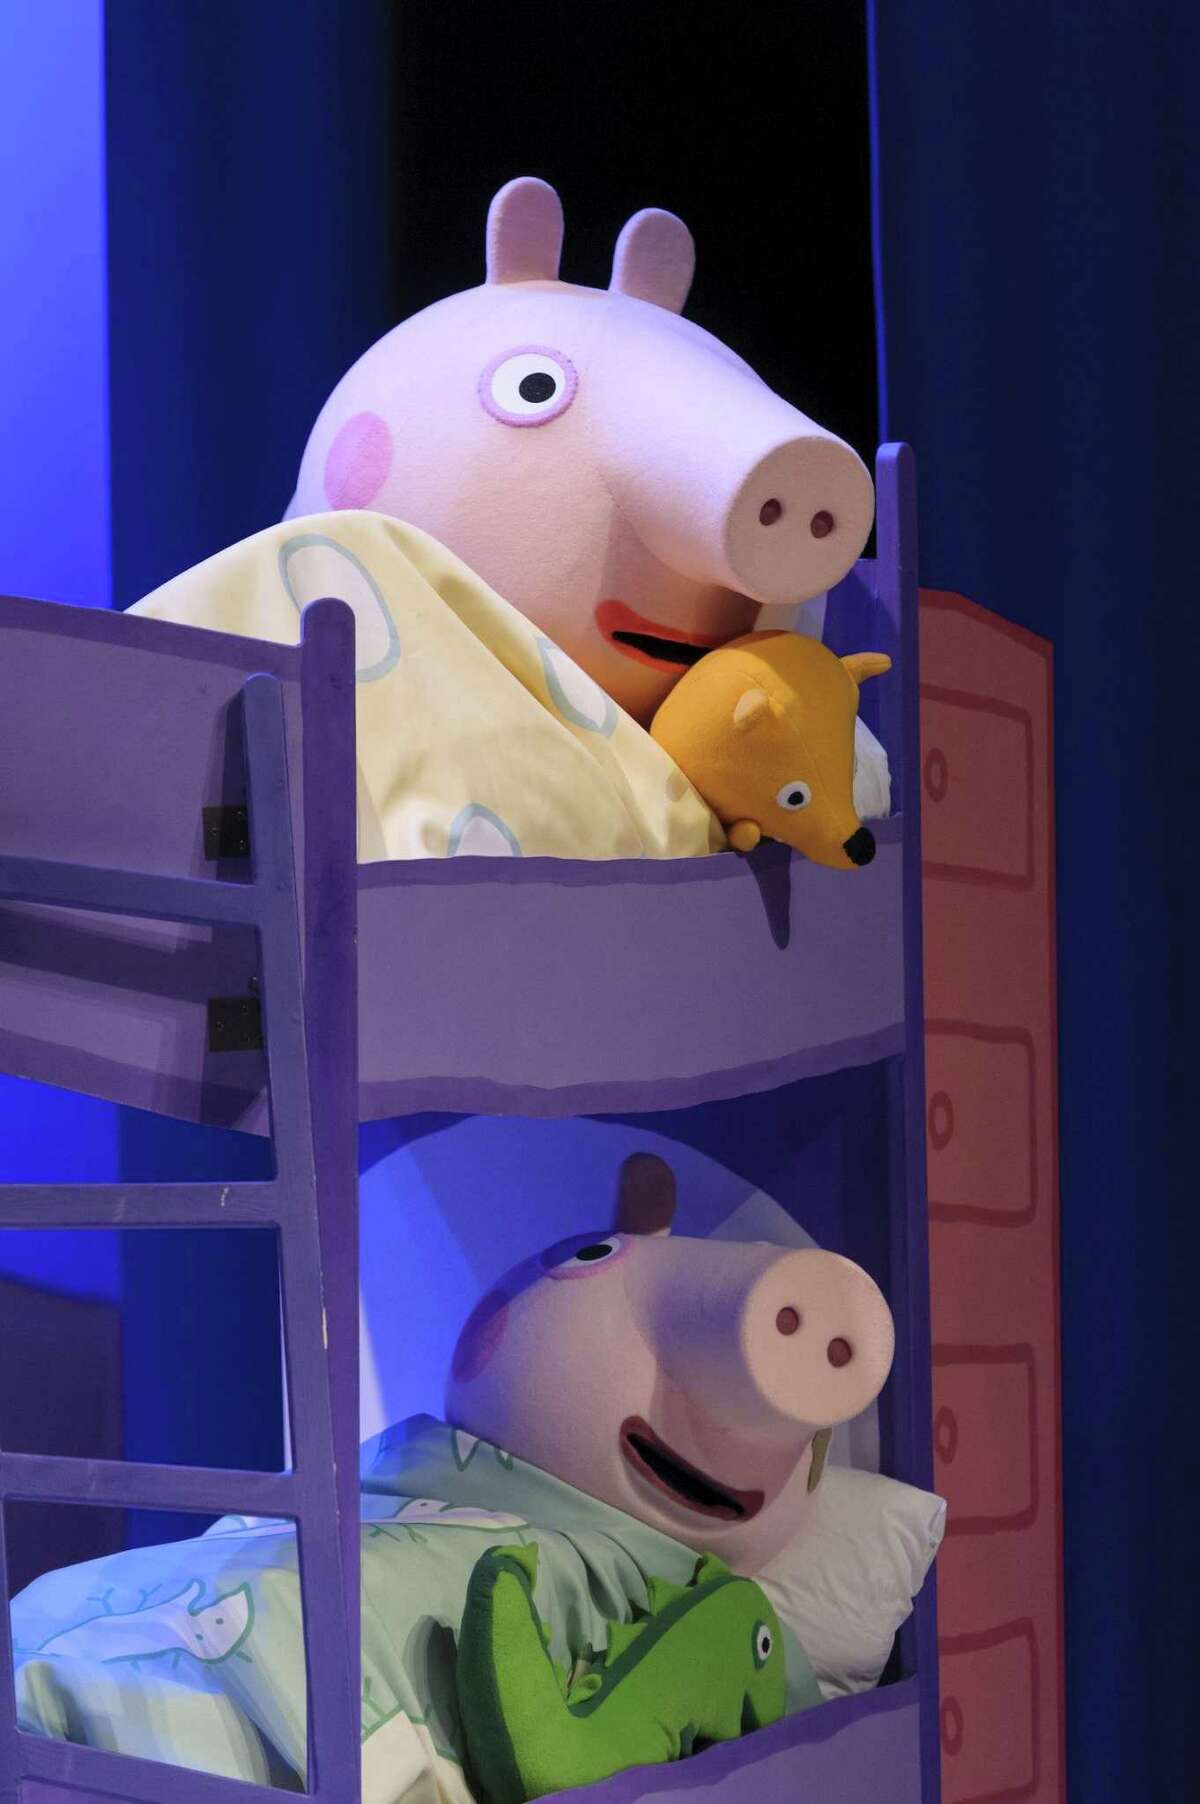 “Peppa Pig Live” comes to Stamford’s Palace Theatre on Nov. 9.